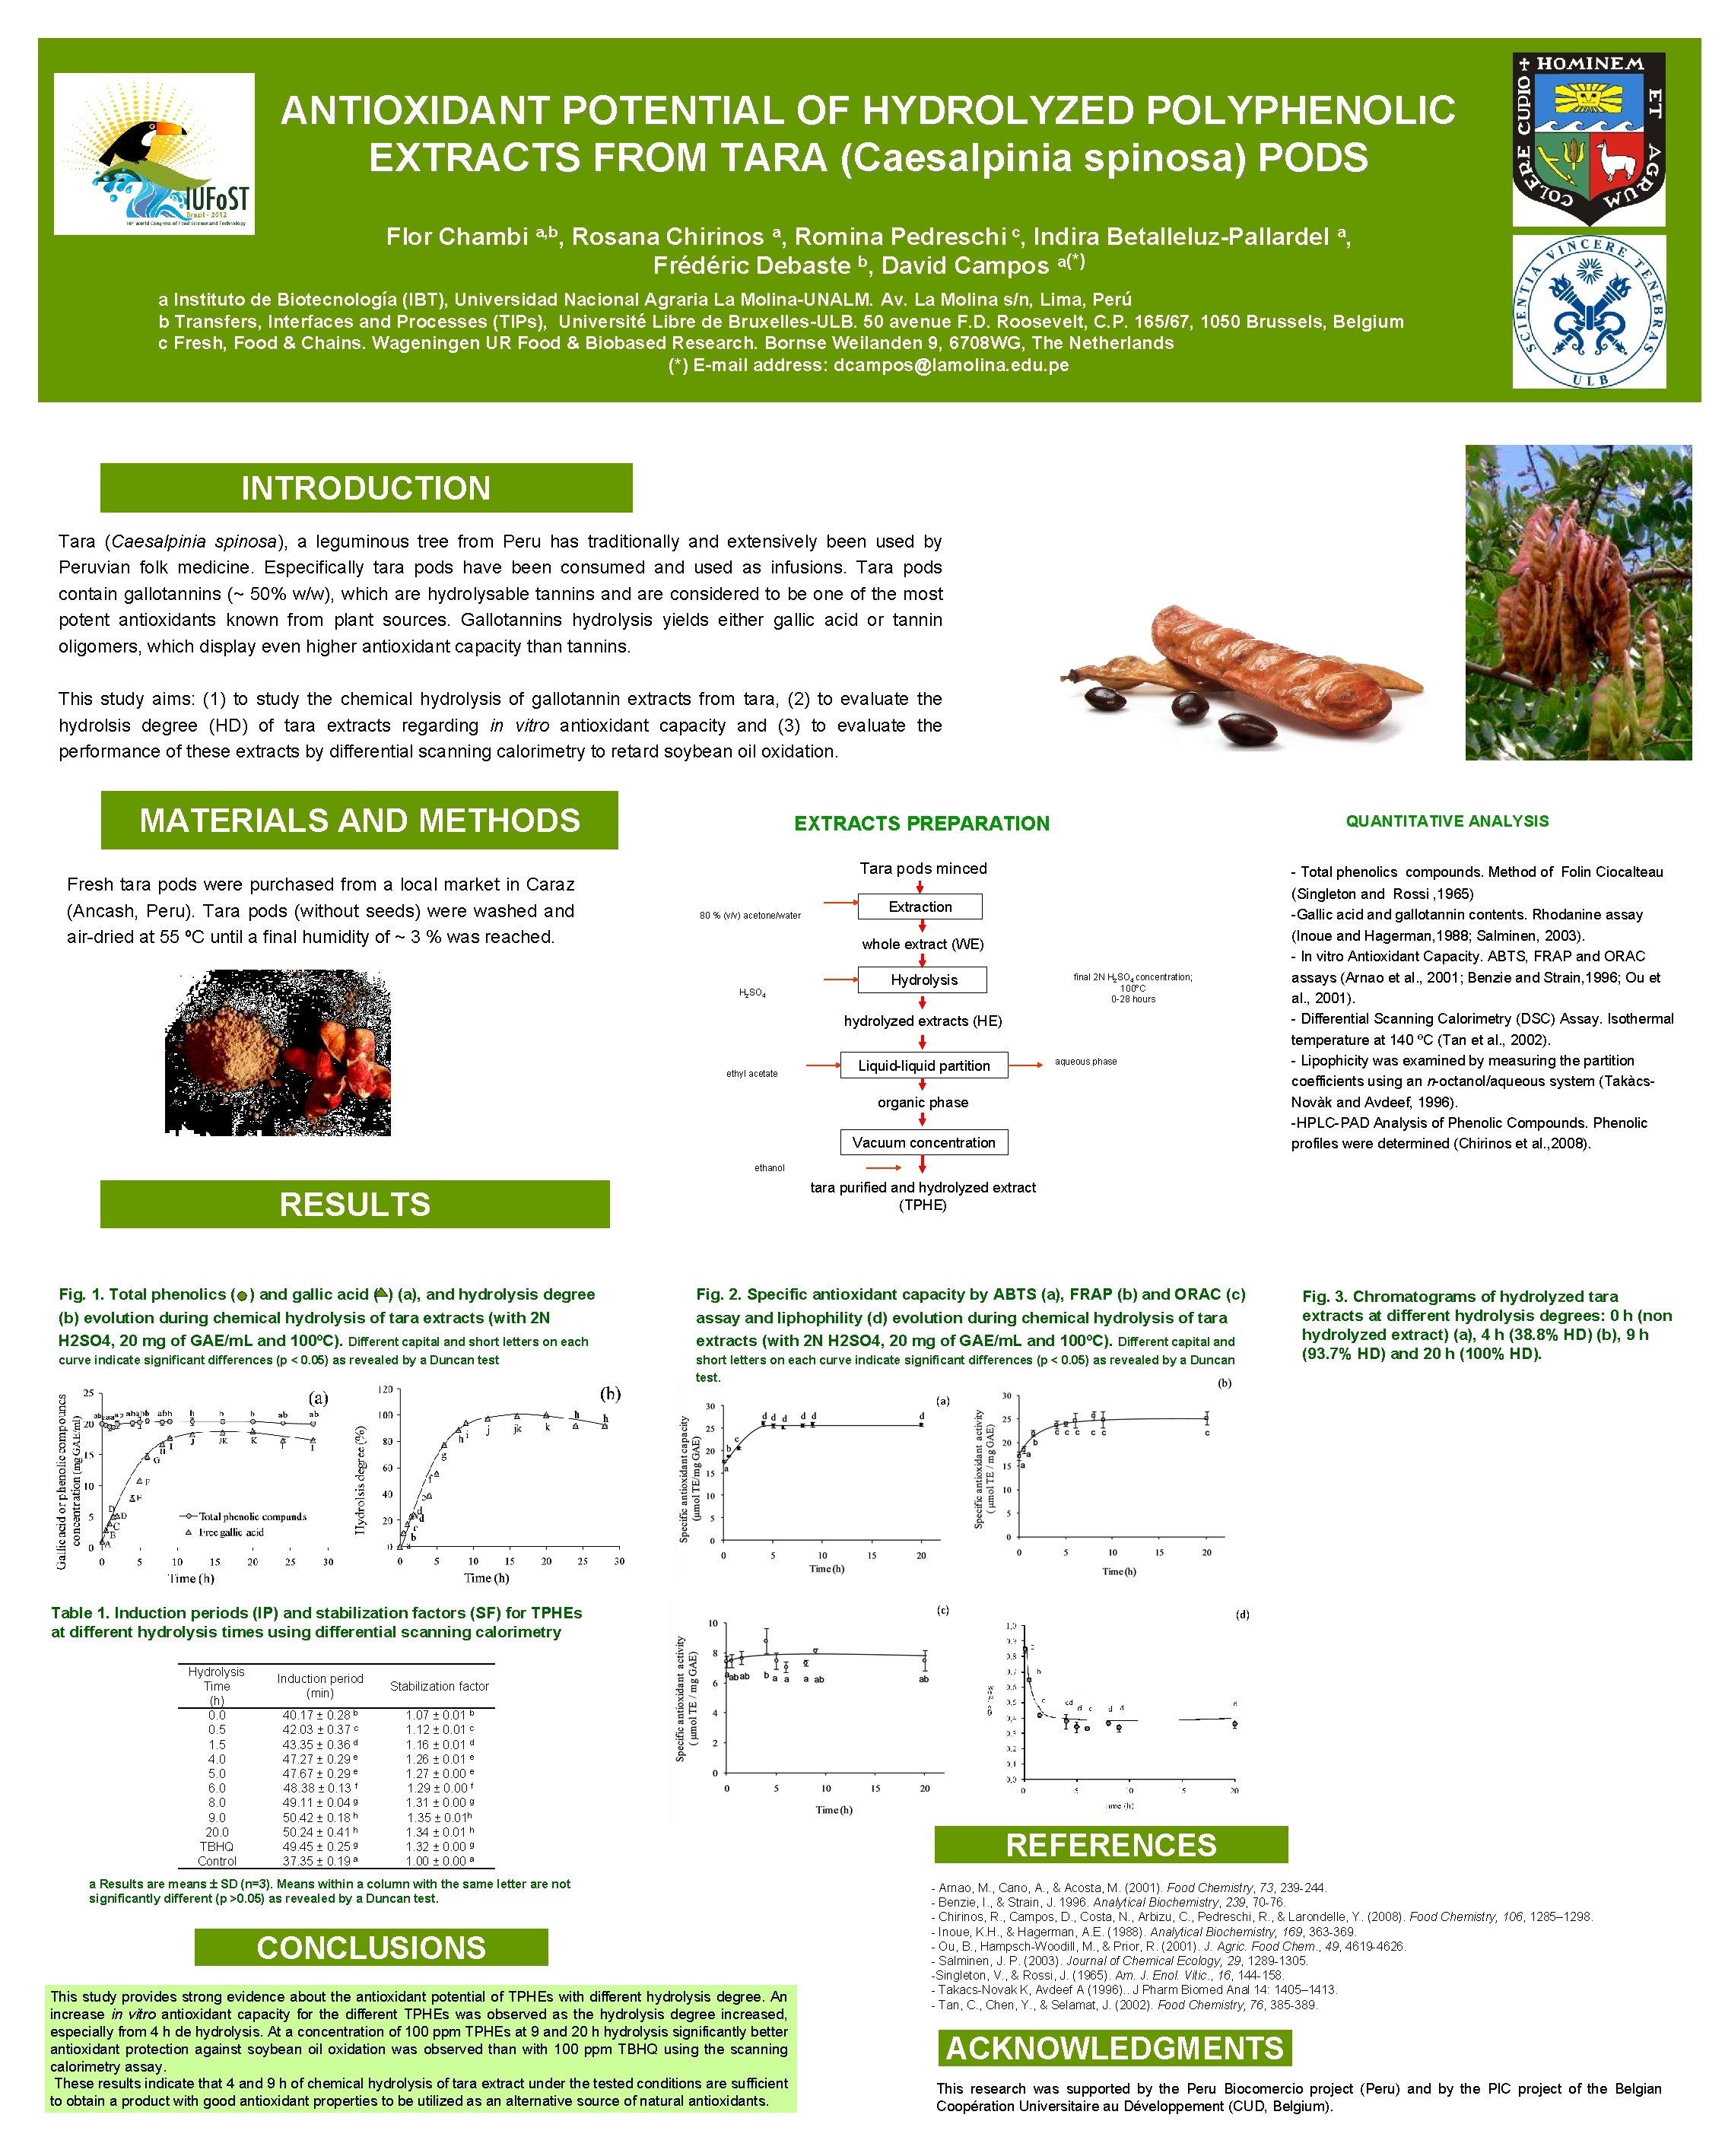 ANTIOXIDANT POTENTIAL OF HYDROLYZED POLYPHENOLIC EXTRACTS FROM TARA (Caesalpinia spinosa) PODS Flor Chambi a,